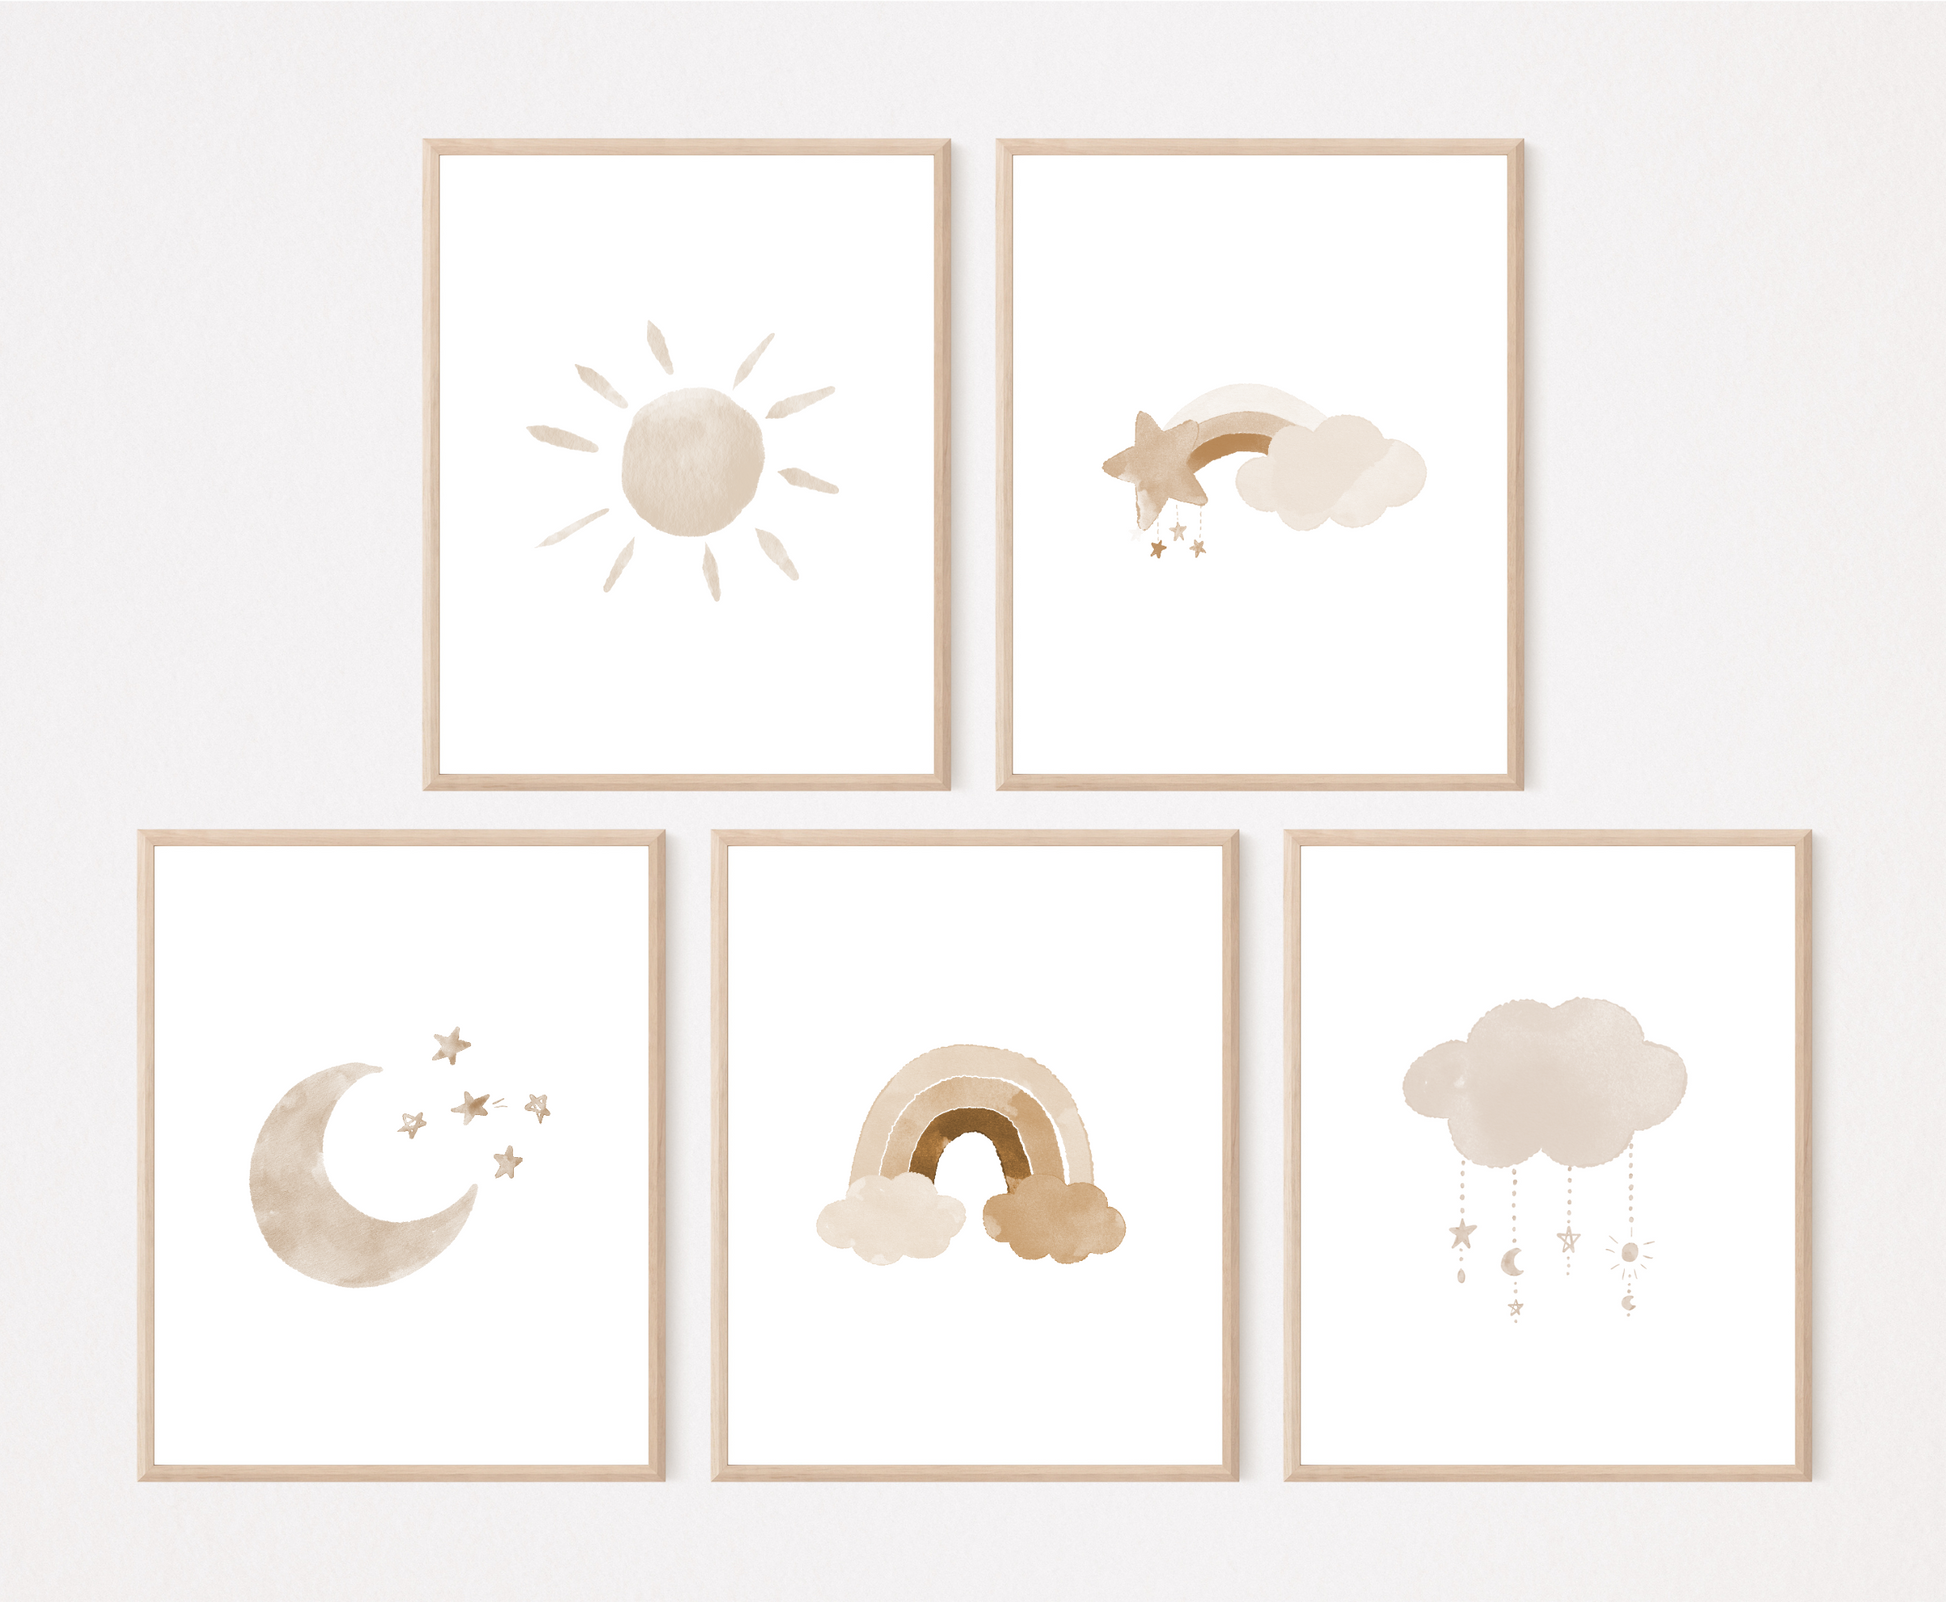 Five frames showing graphics in different shades of beige. The first one shows an almond-beige sun, the second one shows cloud and a star with a rainbow in different shades of beige right behind them. The third one shows a beige crescent moon with tiny stars right beside it, the fourth one shows a rainbow in different shades of beige. While the fifth frame shows an almond-beige cloud with tiny crescent moons and stars dangling from it.